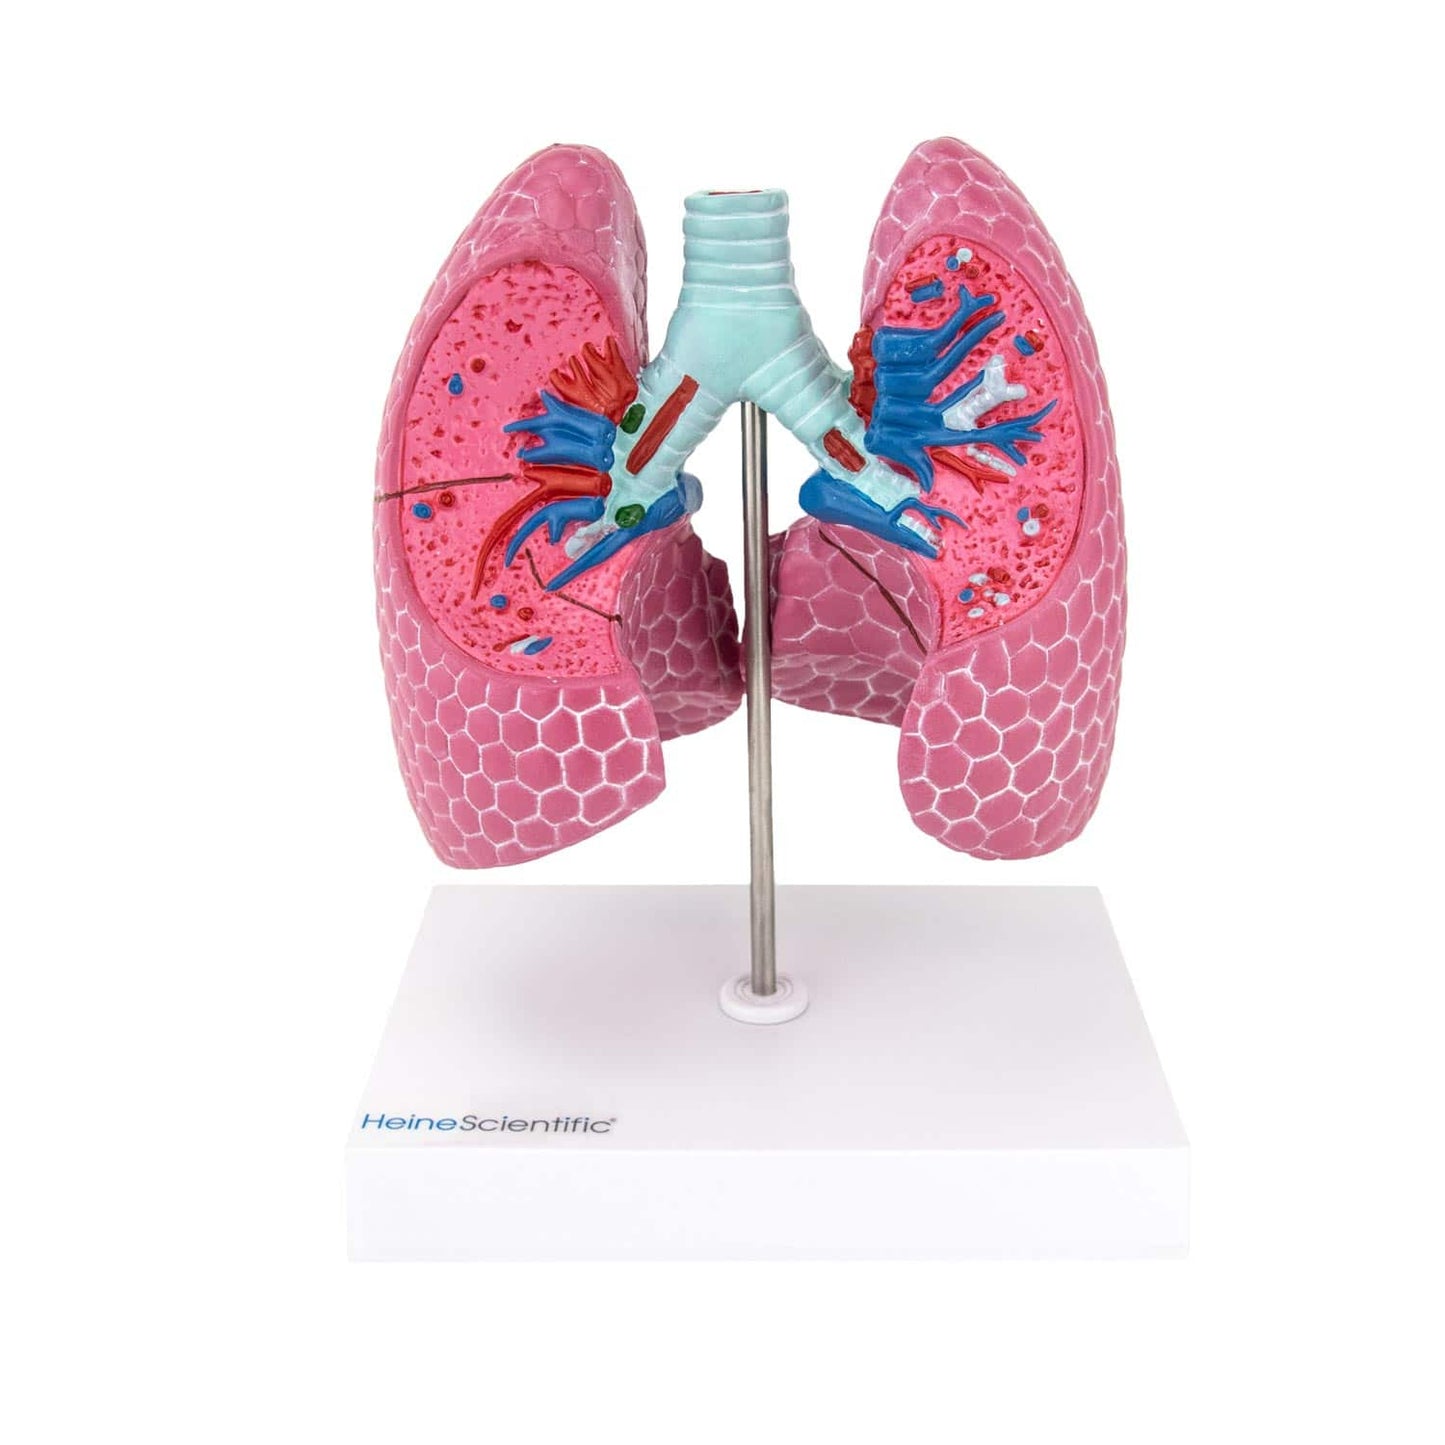 Lung Model With Anatomical Structures And Diseases From Heinescientific